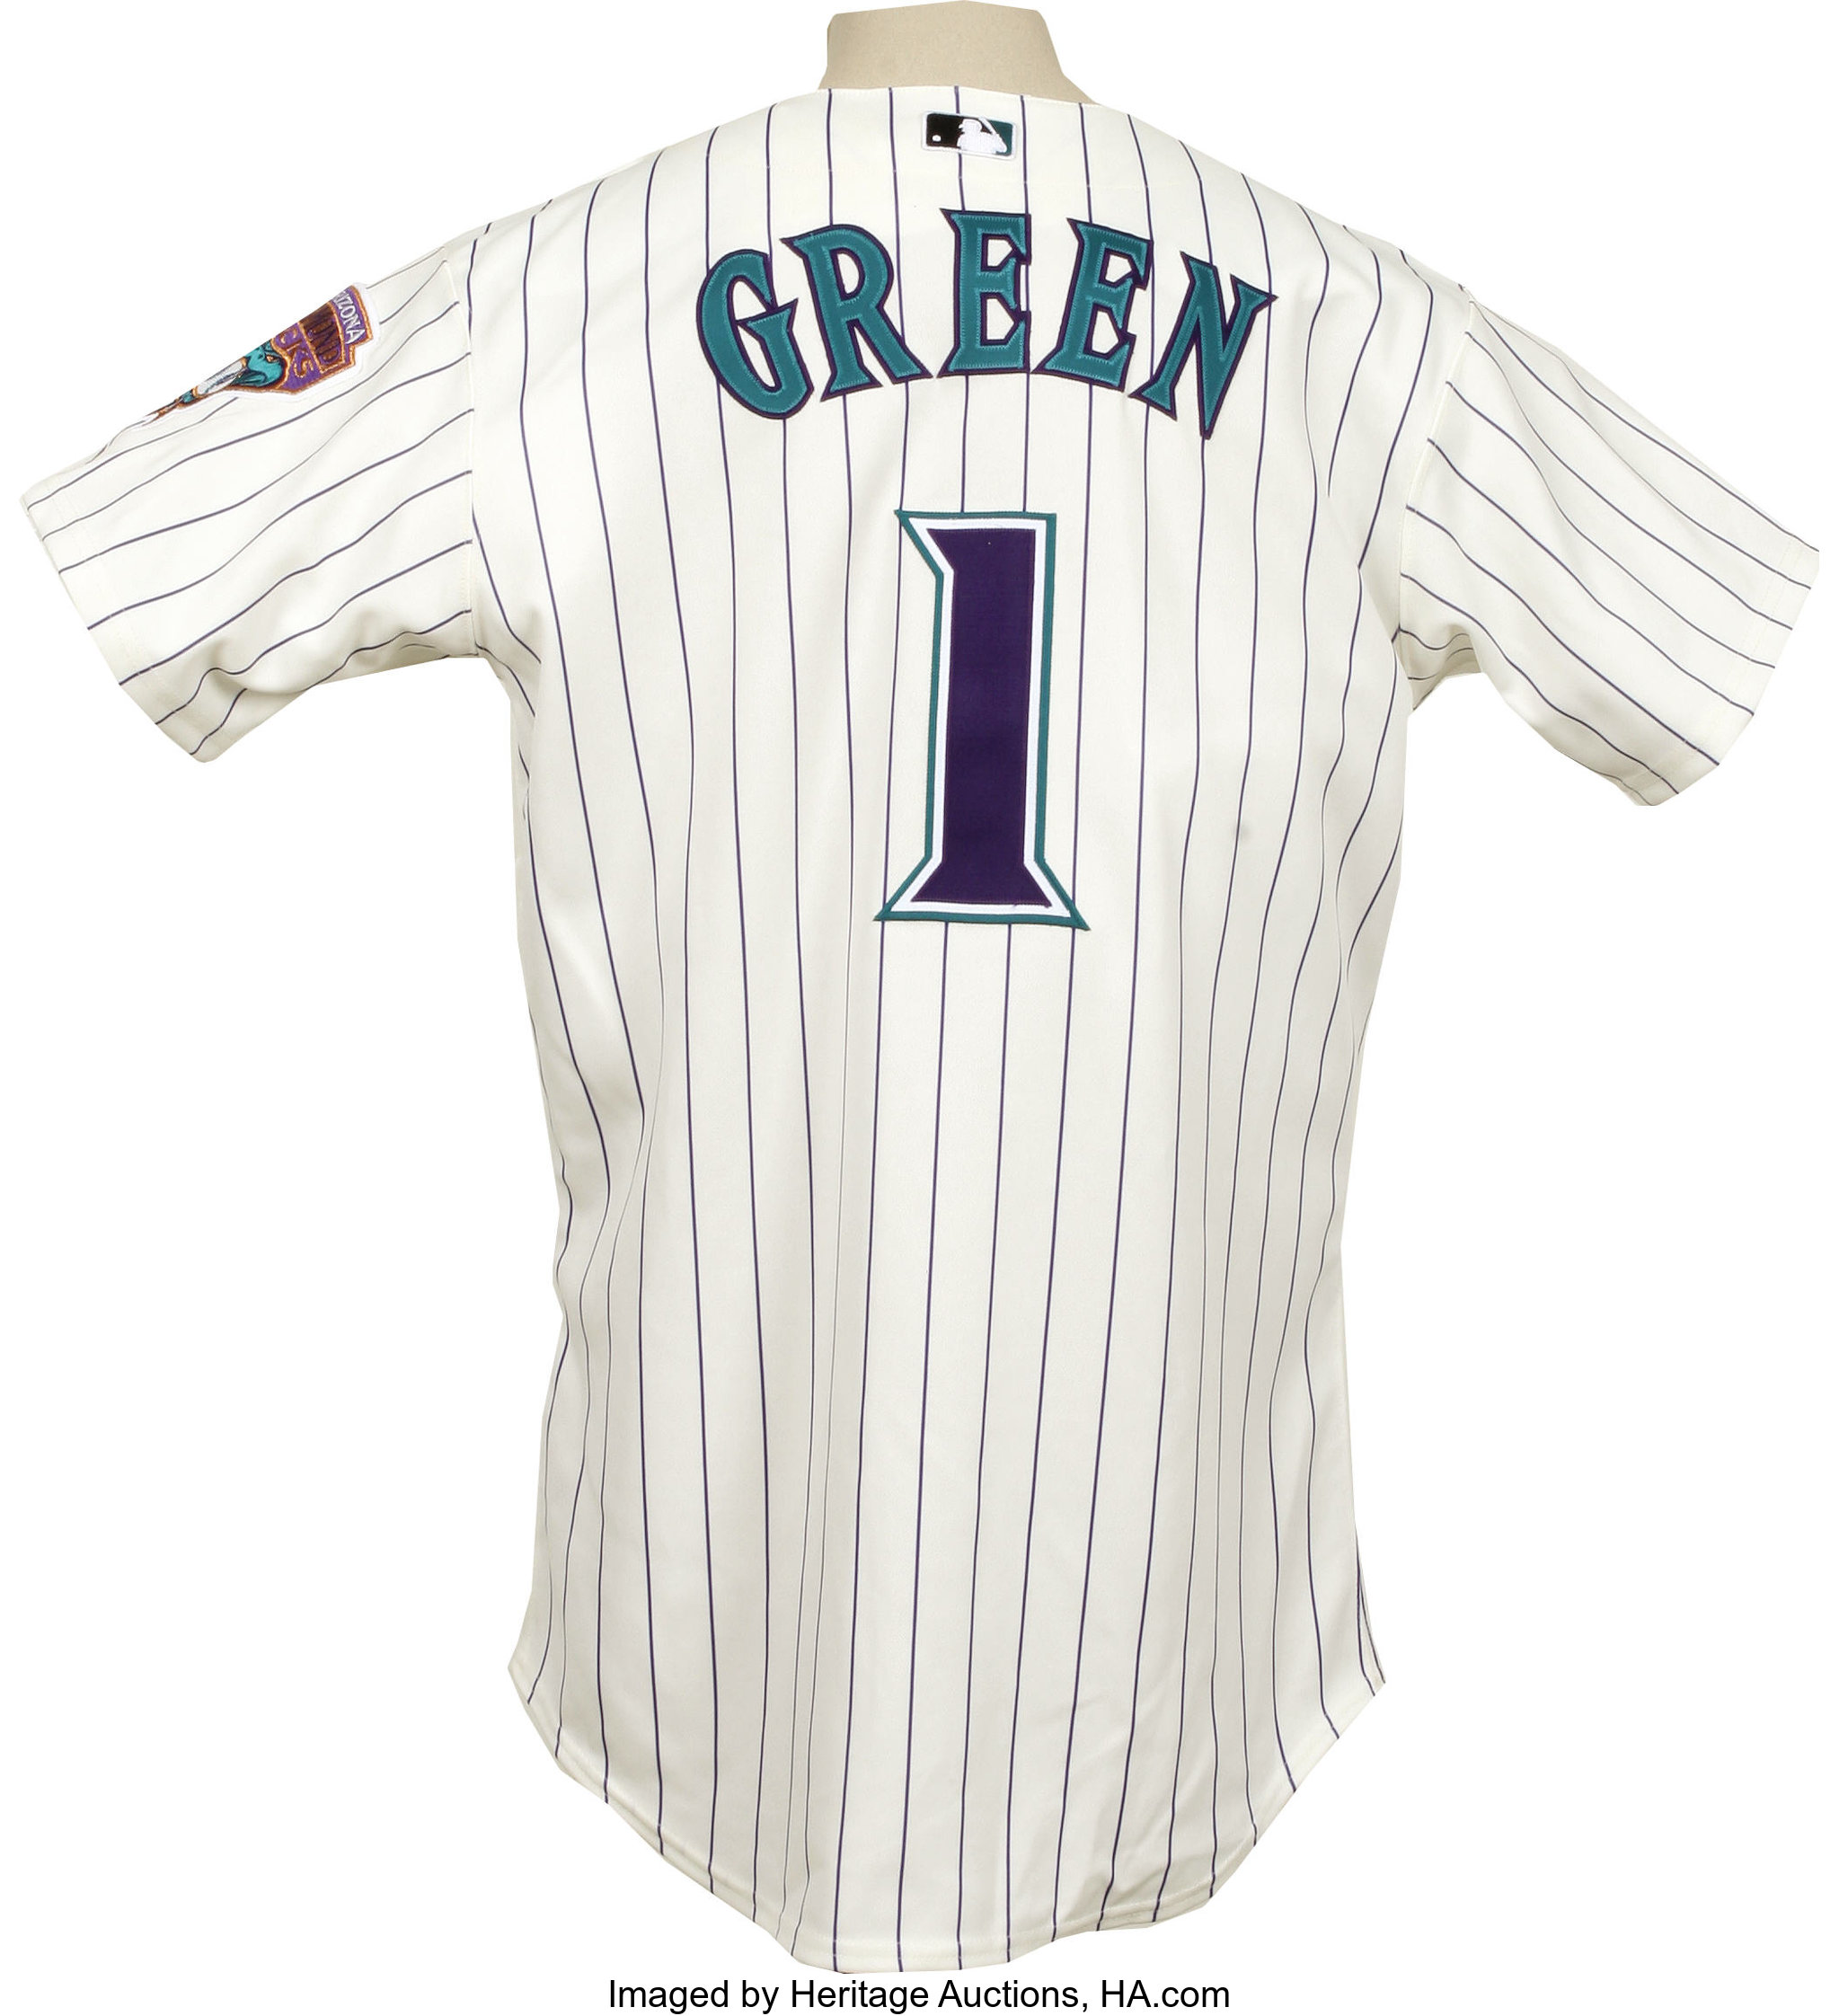 2004-05 Andy Green Game Used Jersey. Recent gamer from the